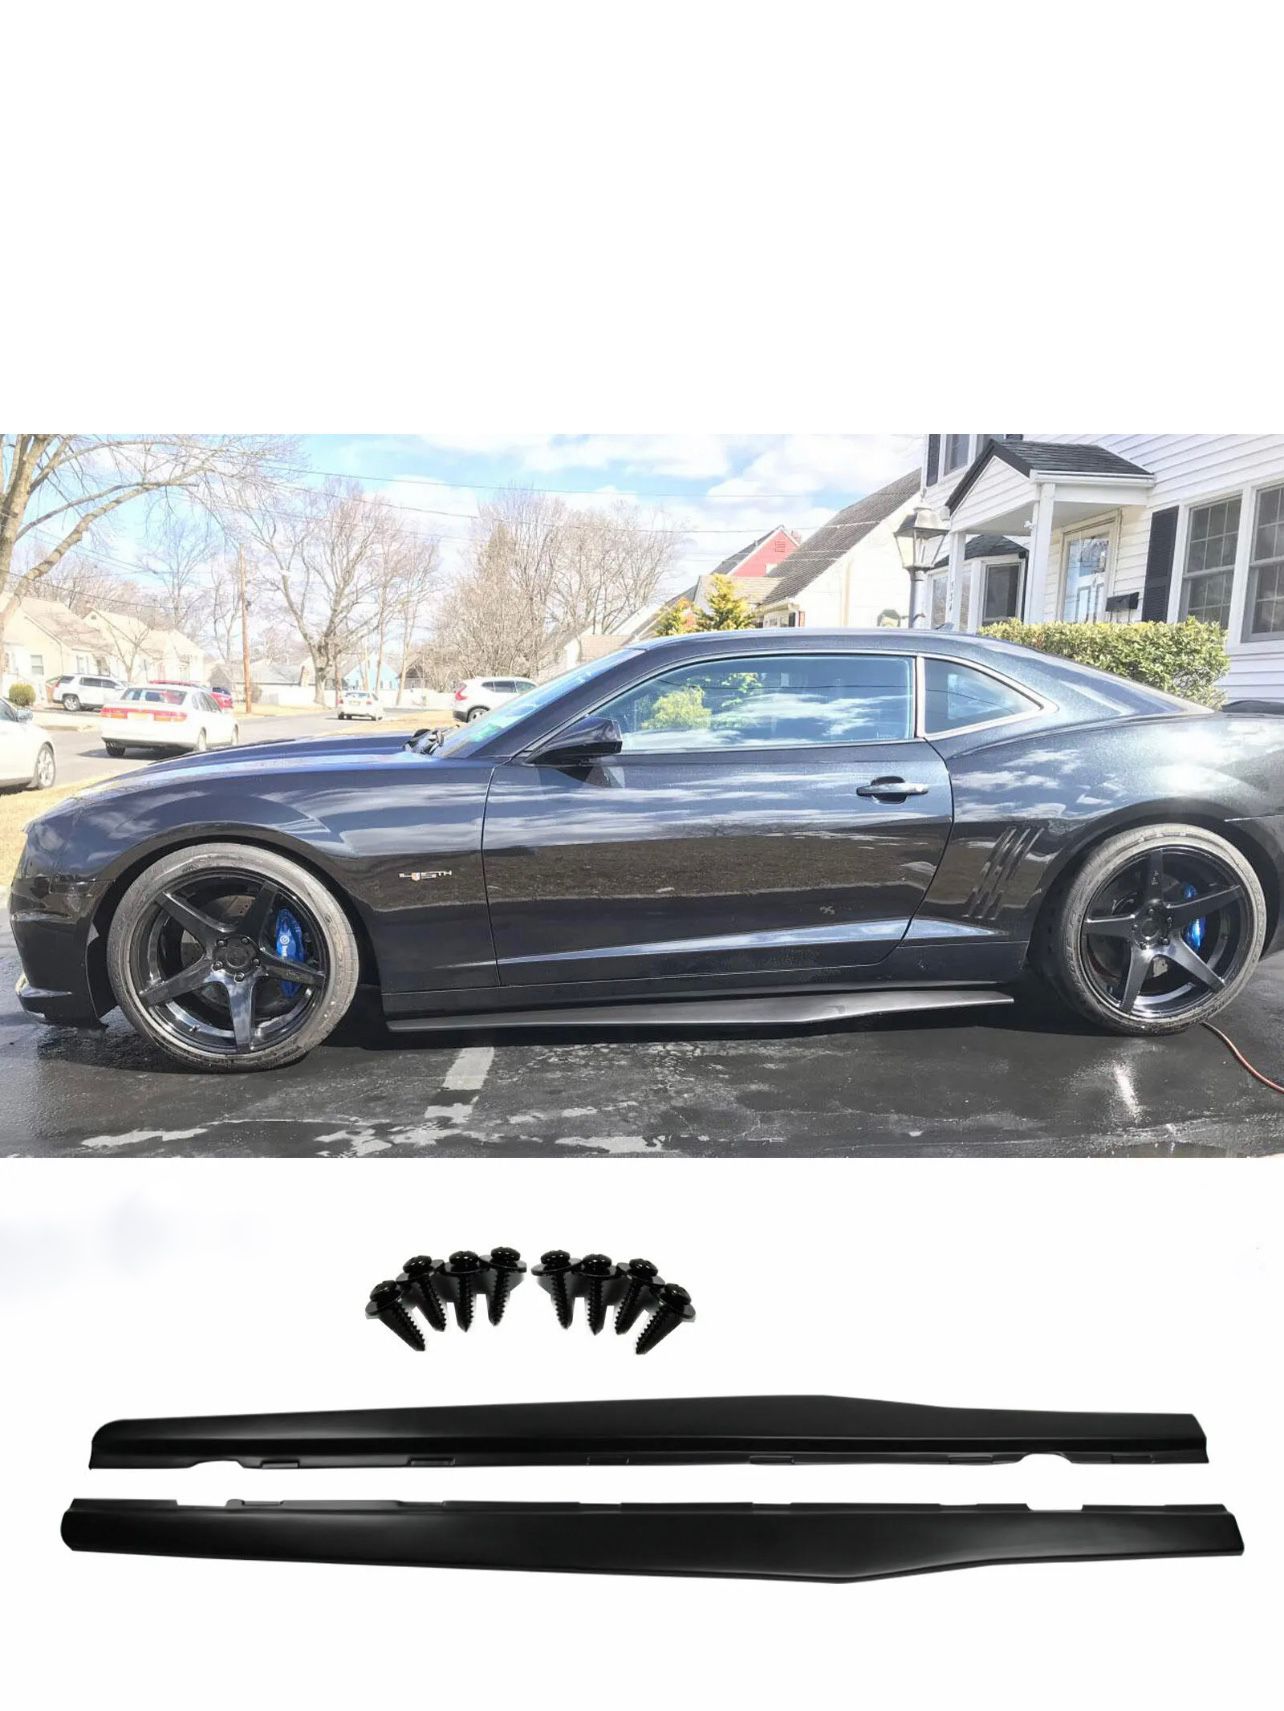 2010-2015 Chevy Camaro SS Aftermarket Side Skirts